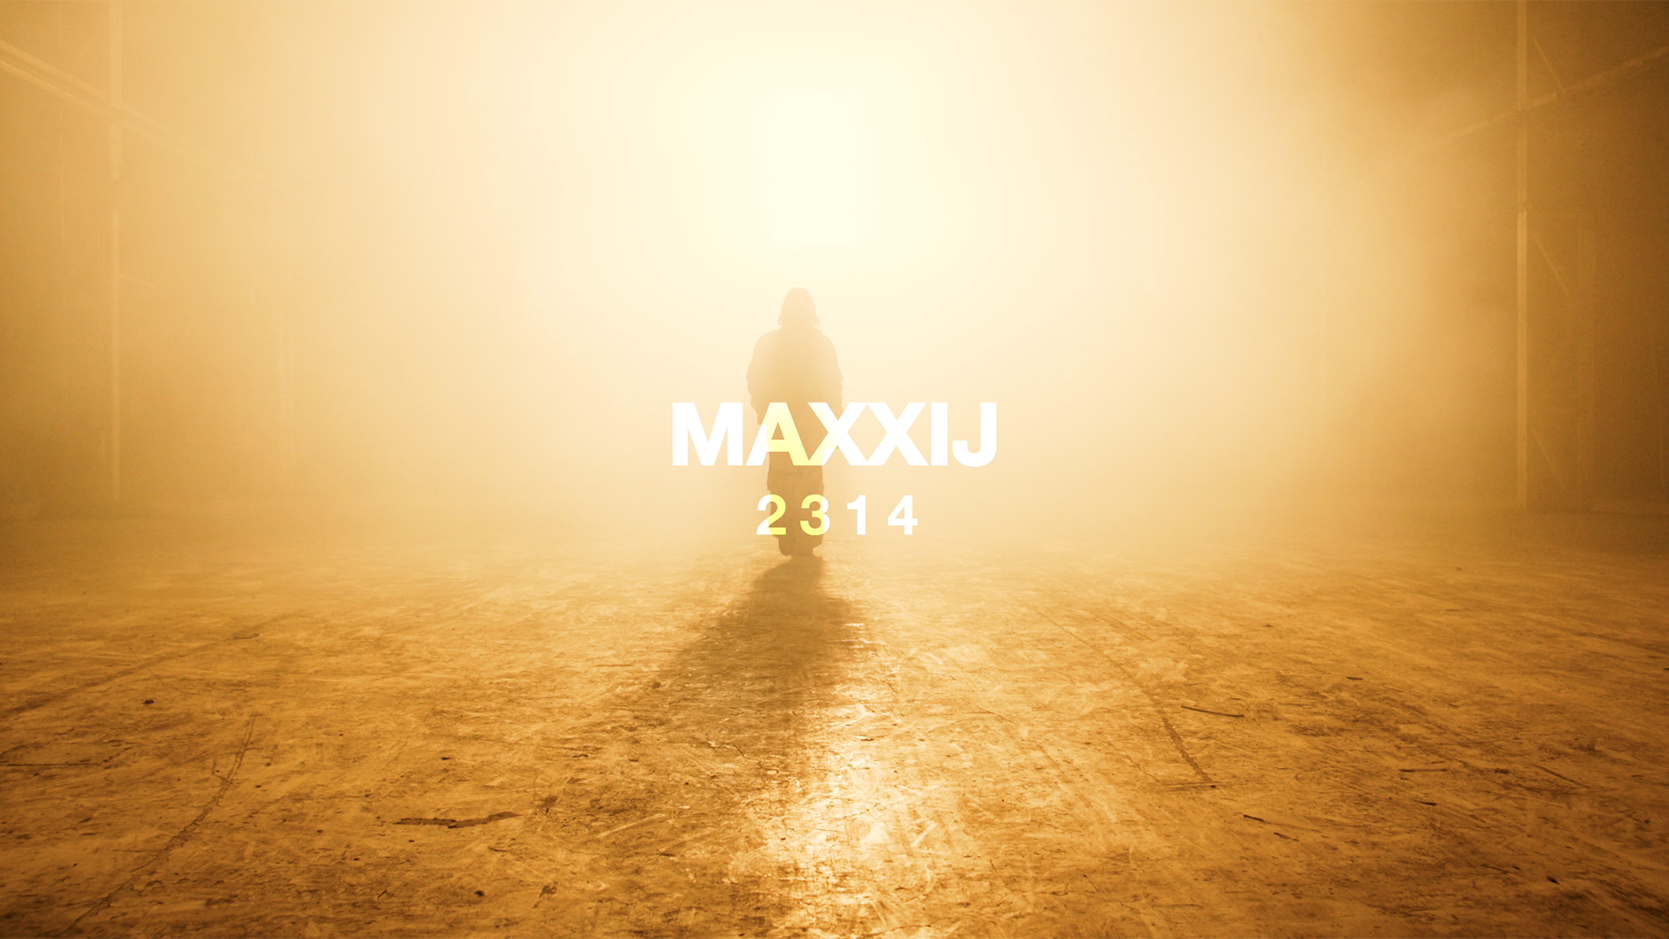 MAXXIJ 2314 poster, sepia colour with figure of a person in the middle  